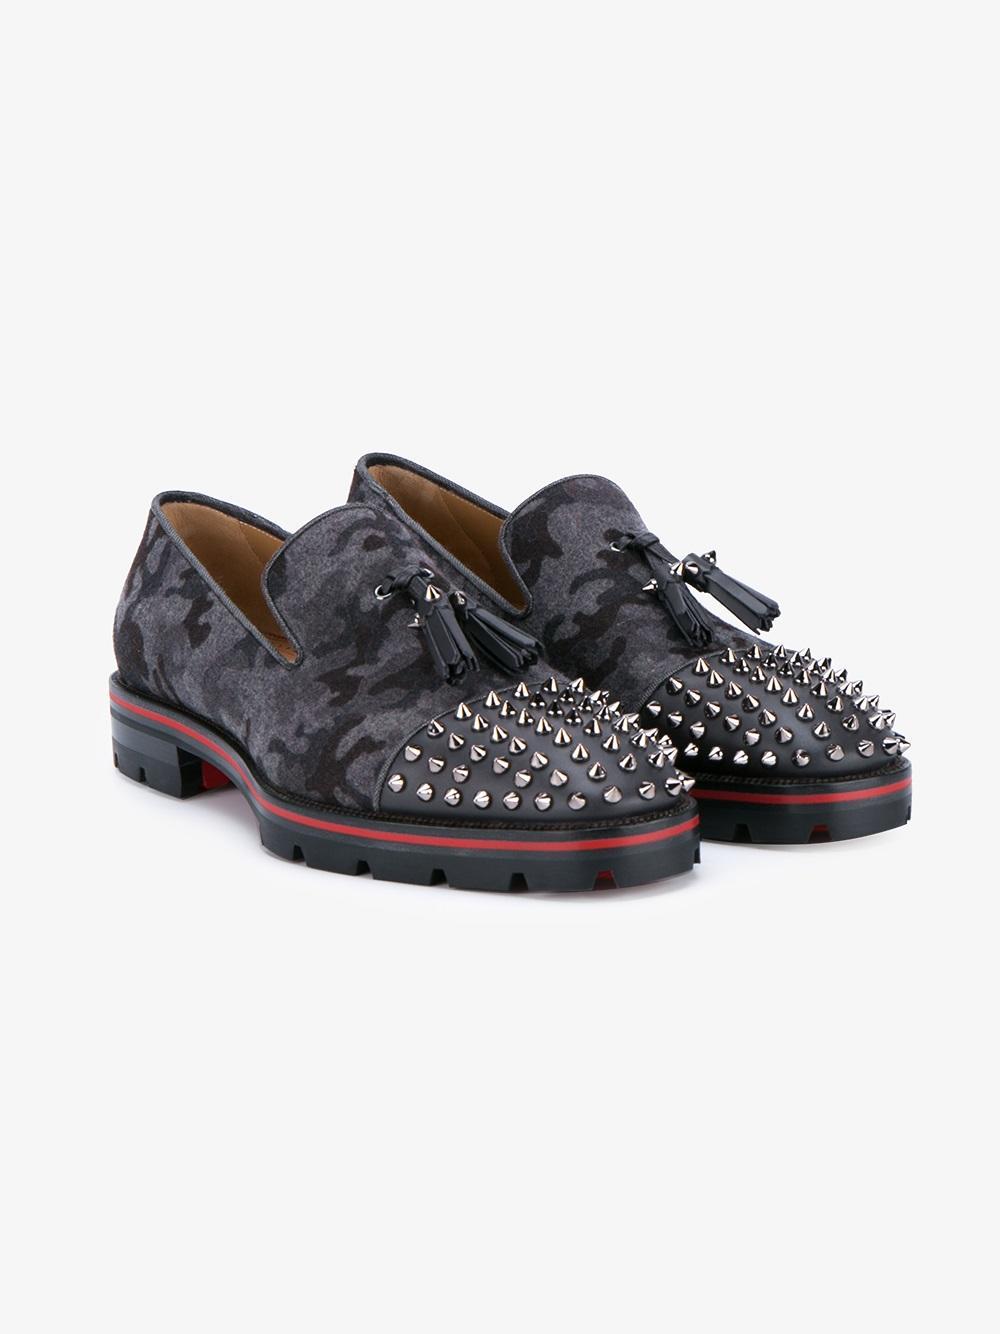 Lyst - Christian Louboutin Spiked Vamp Camouflage Loafers in Gray for Men